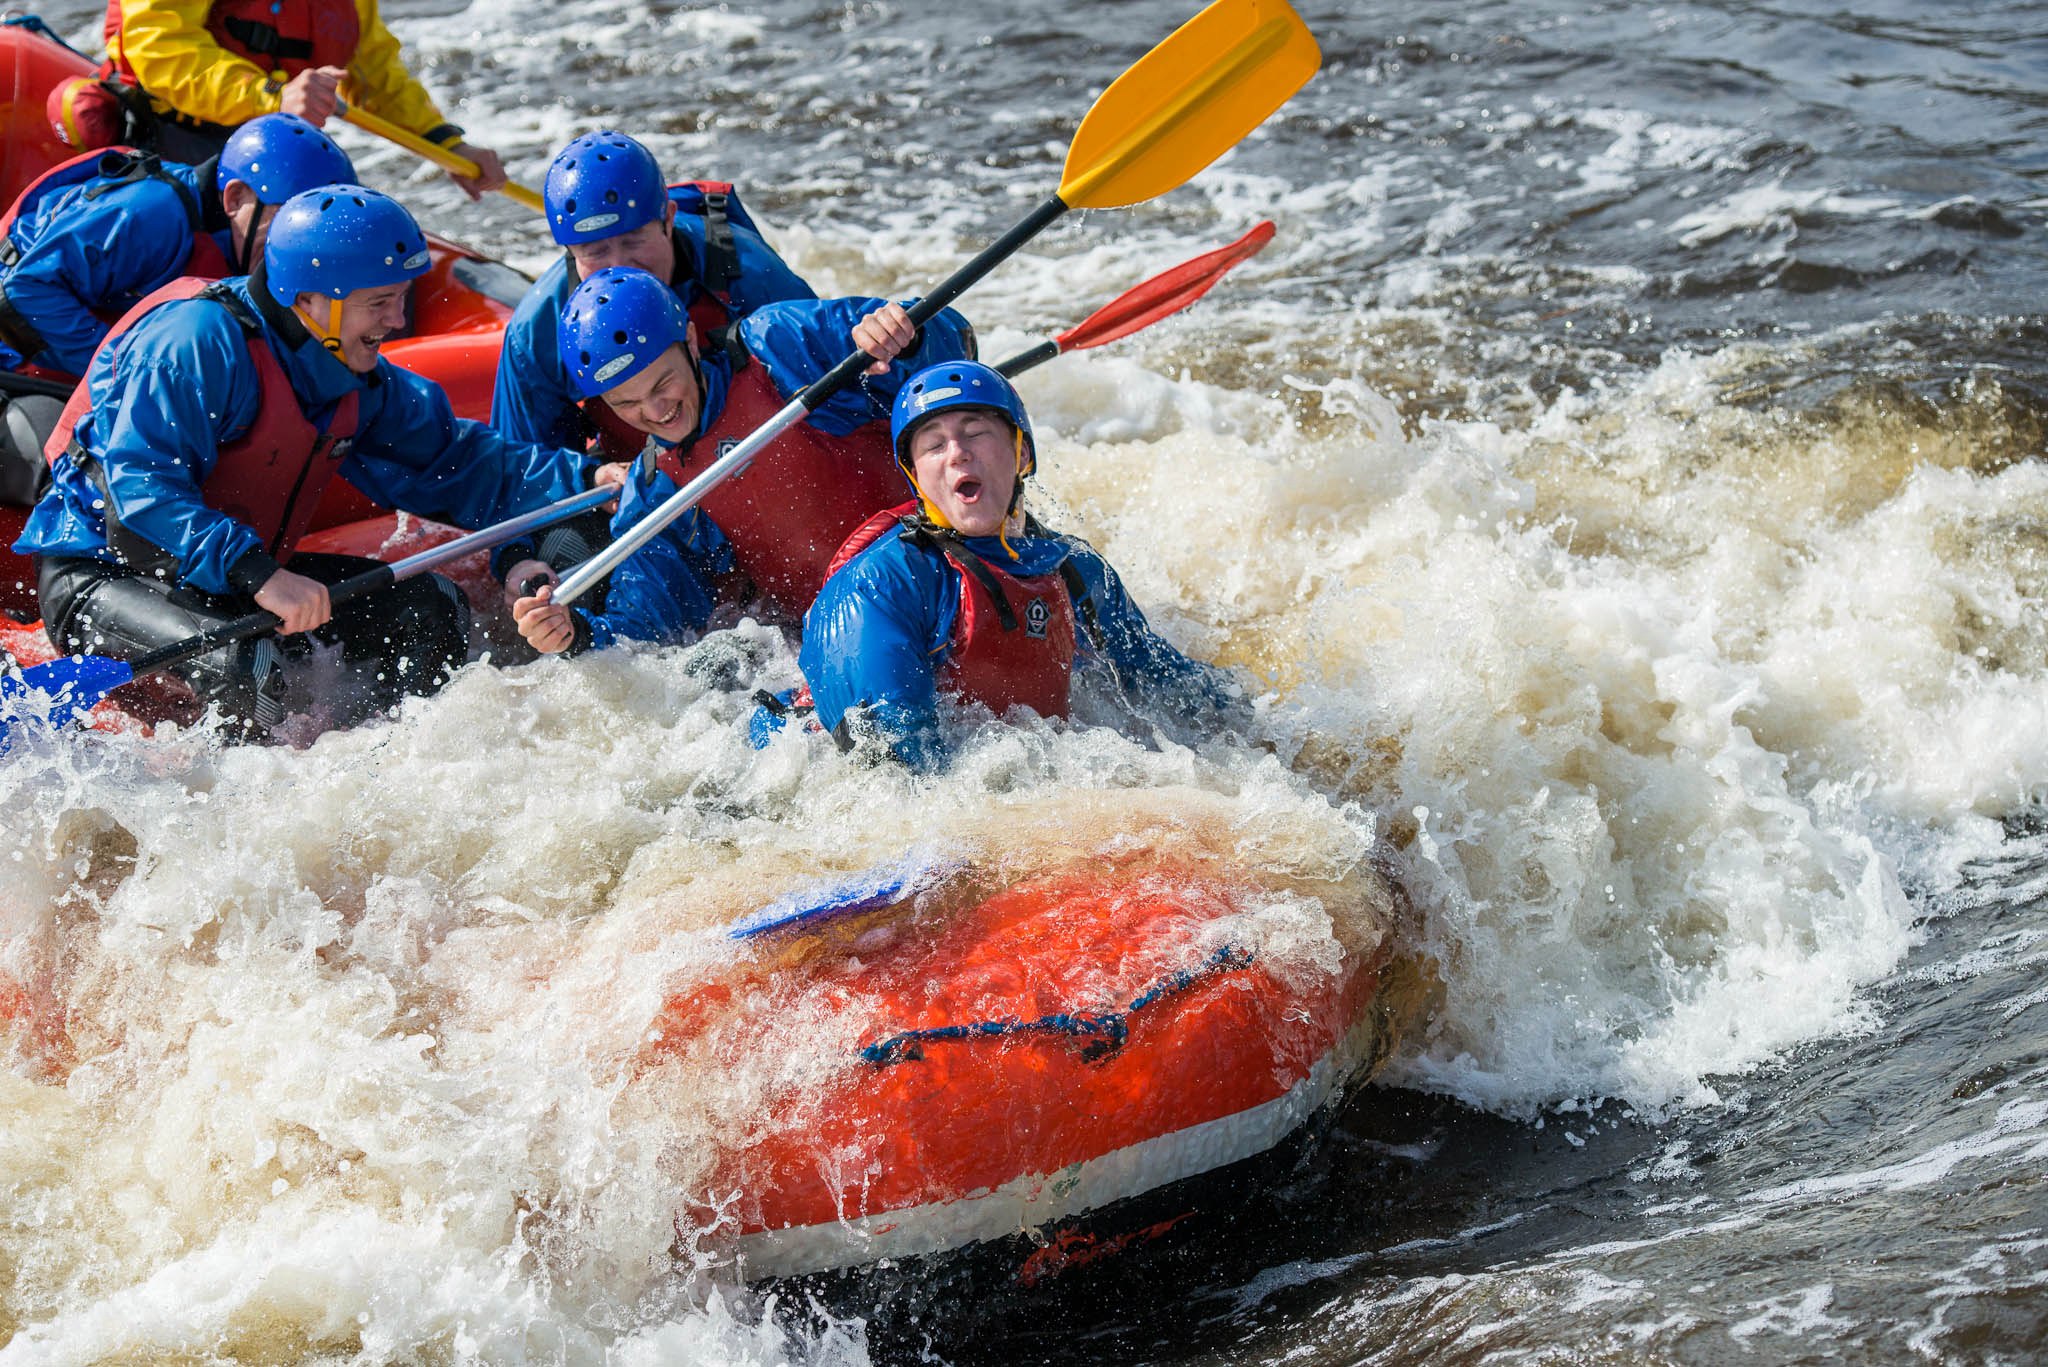 Navigate sharp twists and turns on the amazing white water rafting course at Tees Barrage